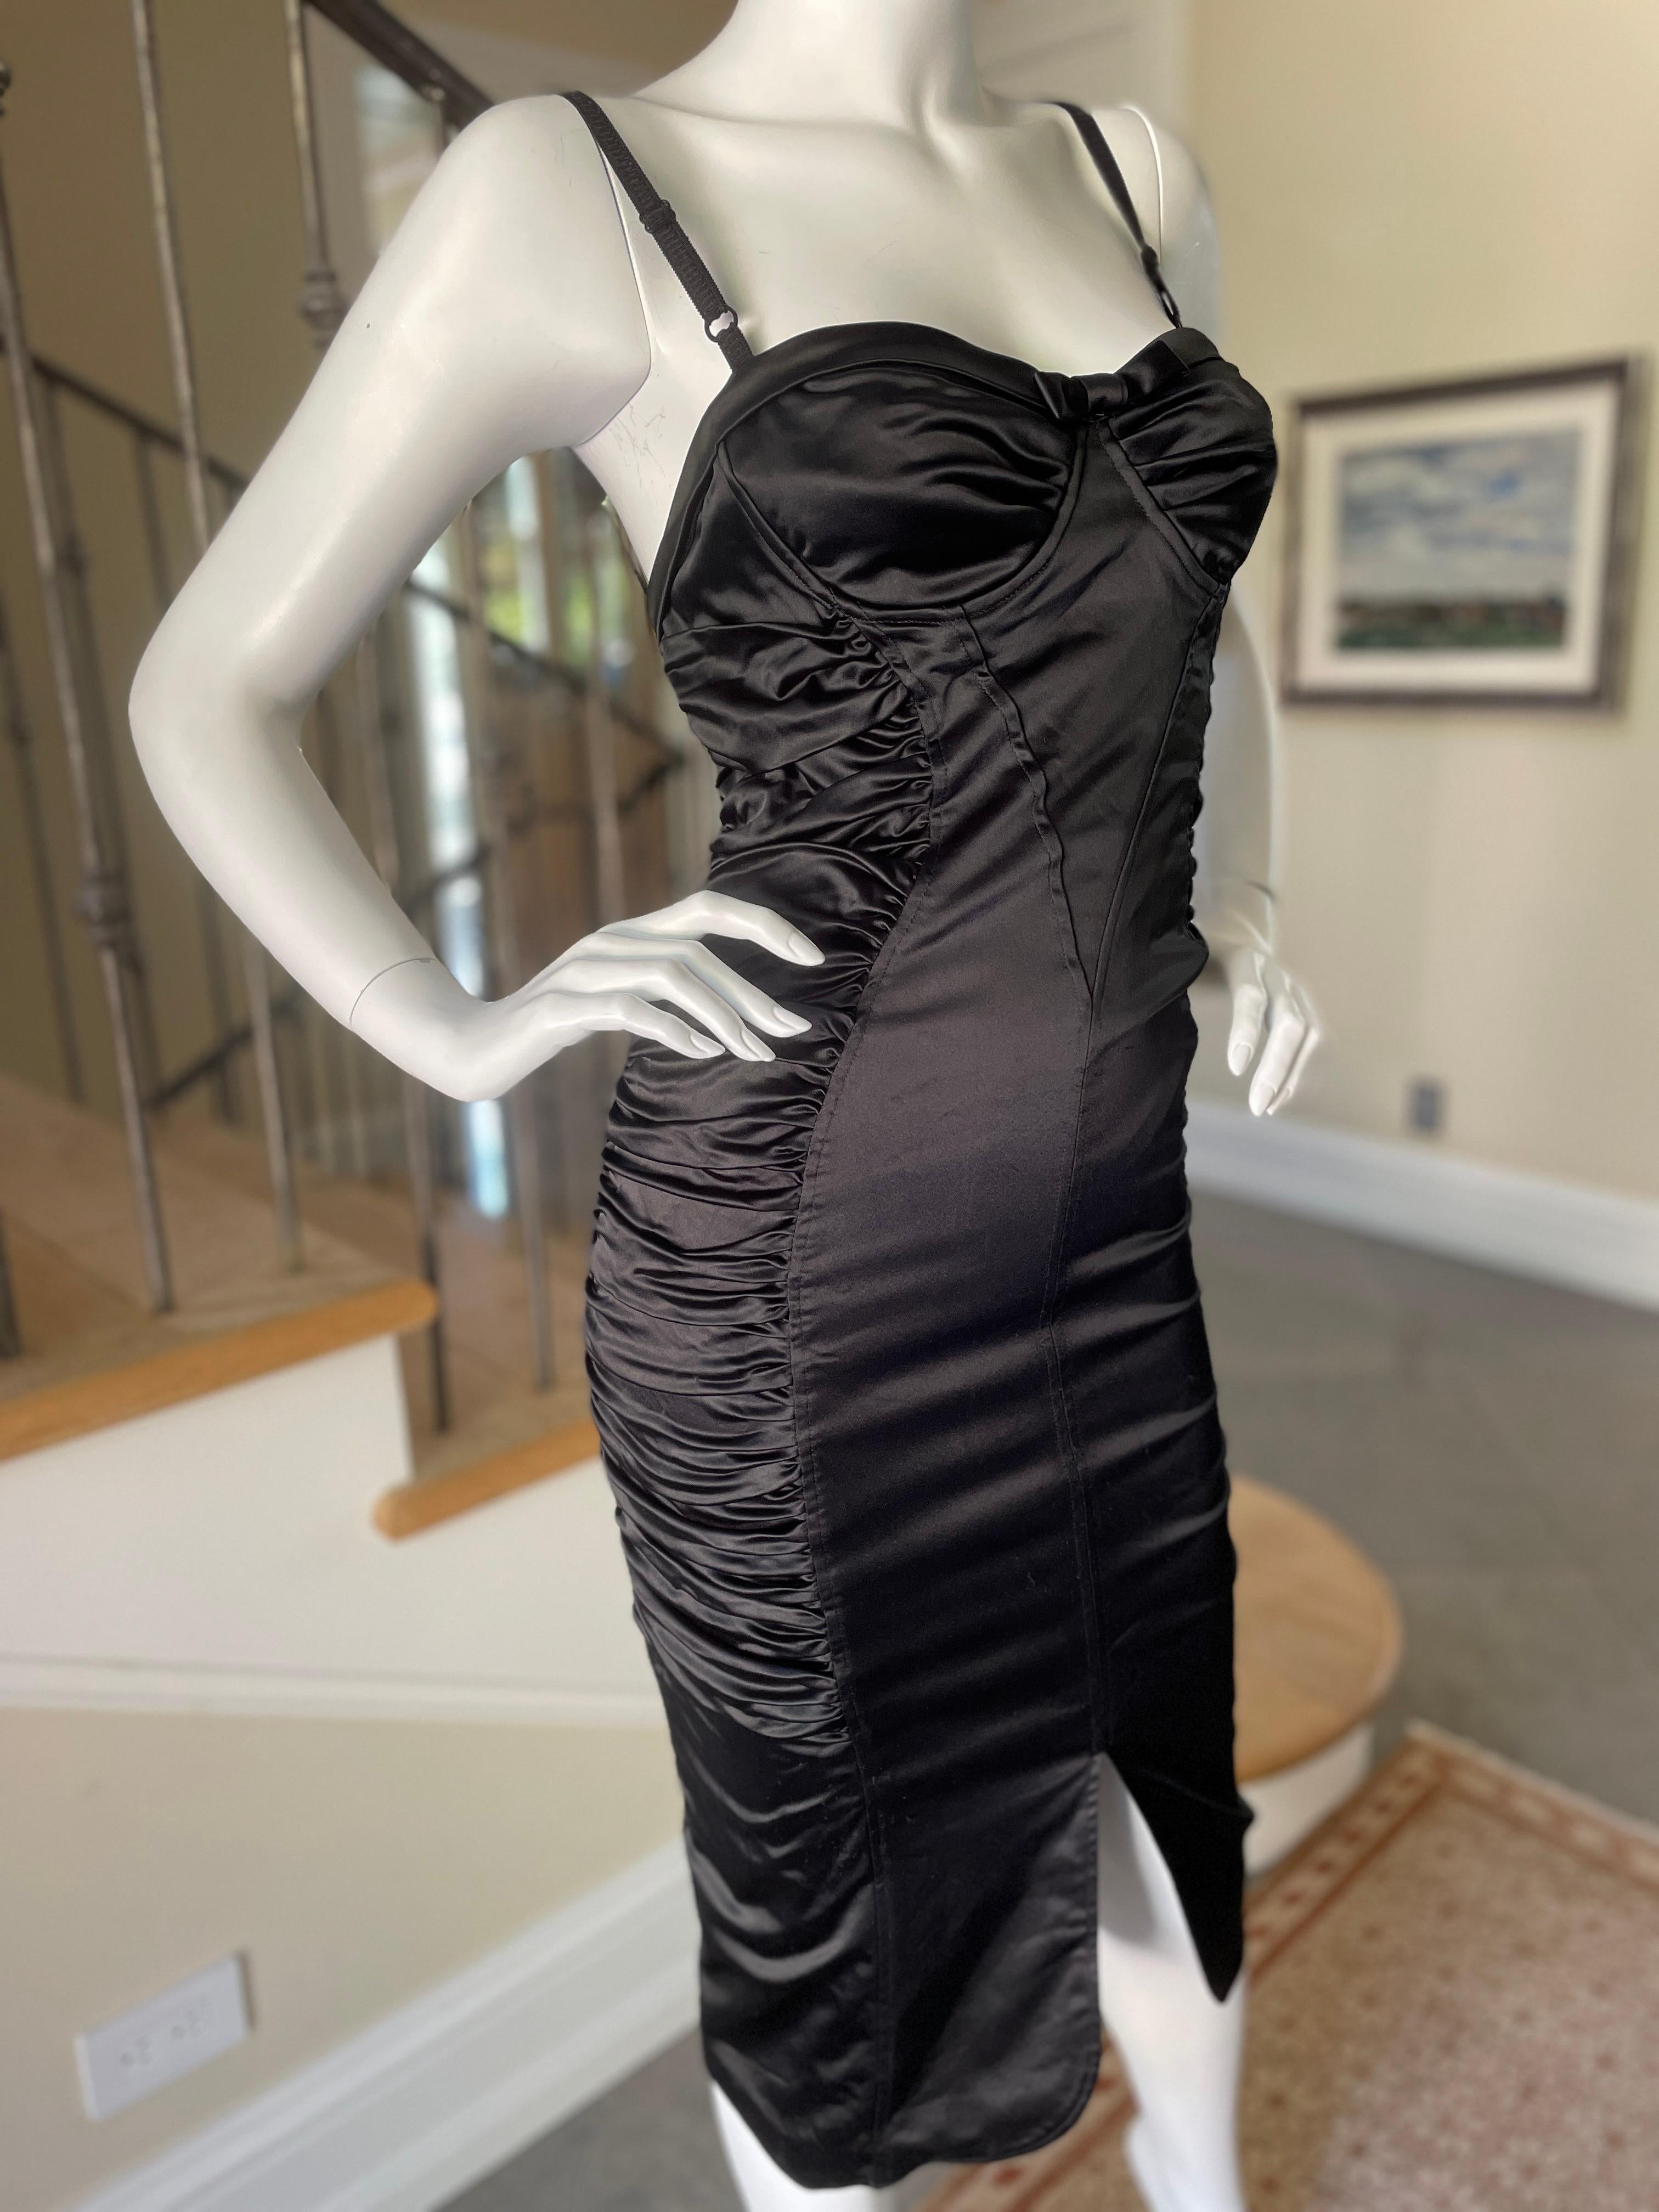 D&G Vintage Ruched Black Cocktail Dress w Underwire Bra by Dolce & Gabbana In Excellent Condition For Sale In Cloverdale, CA